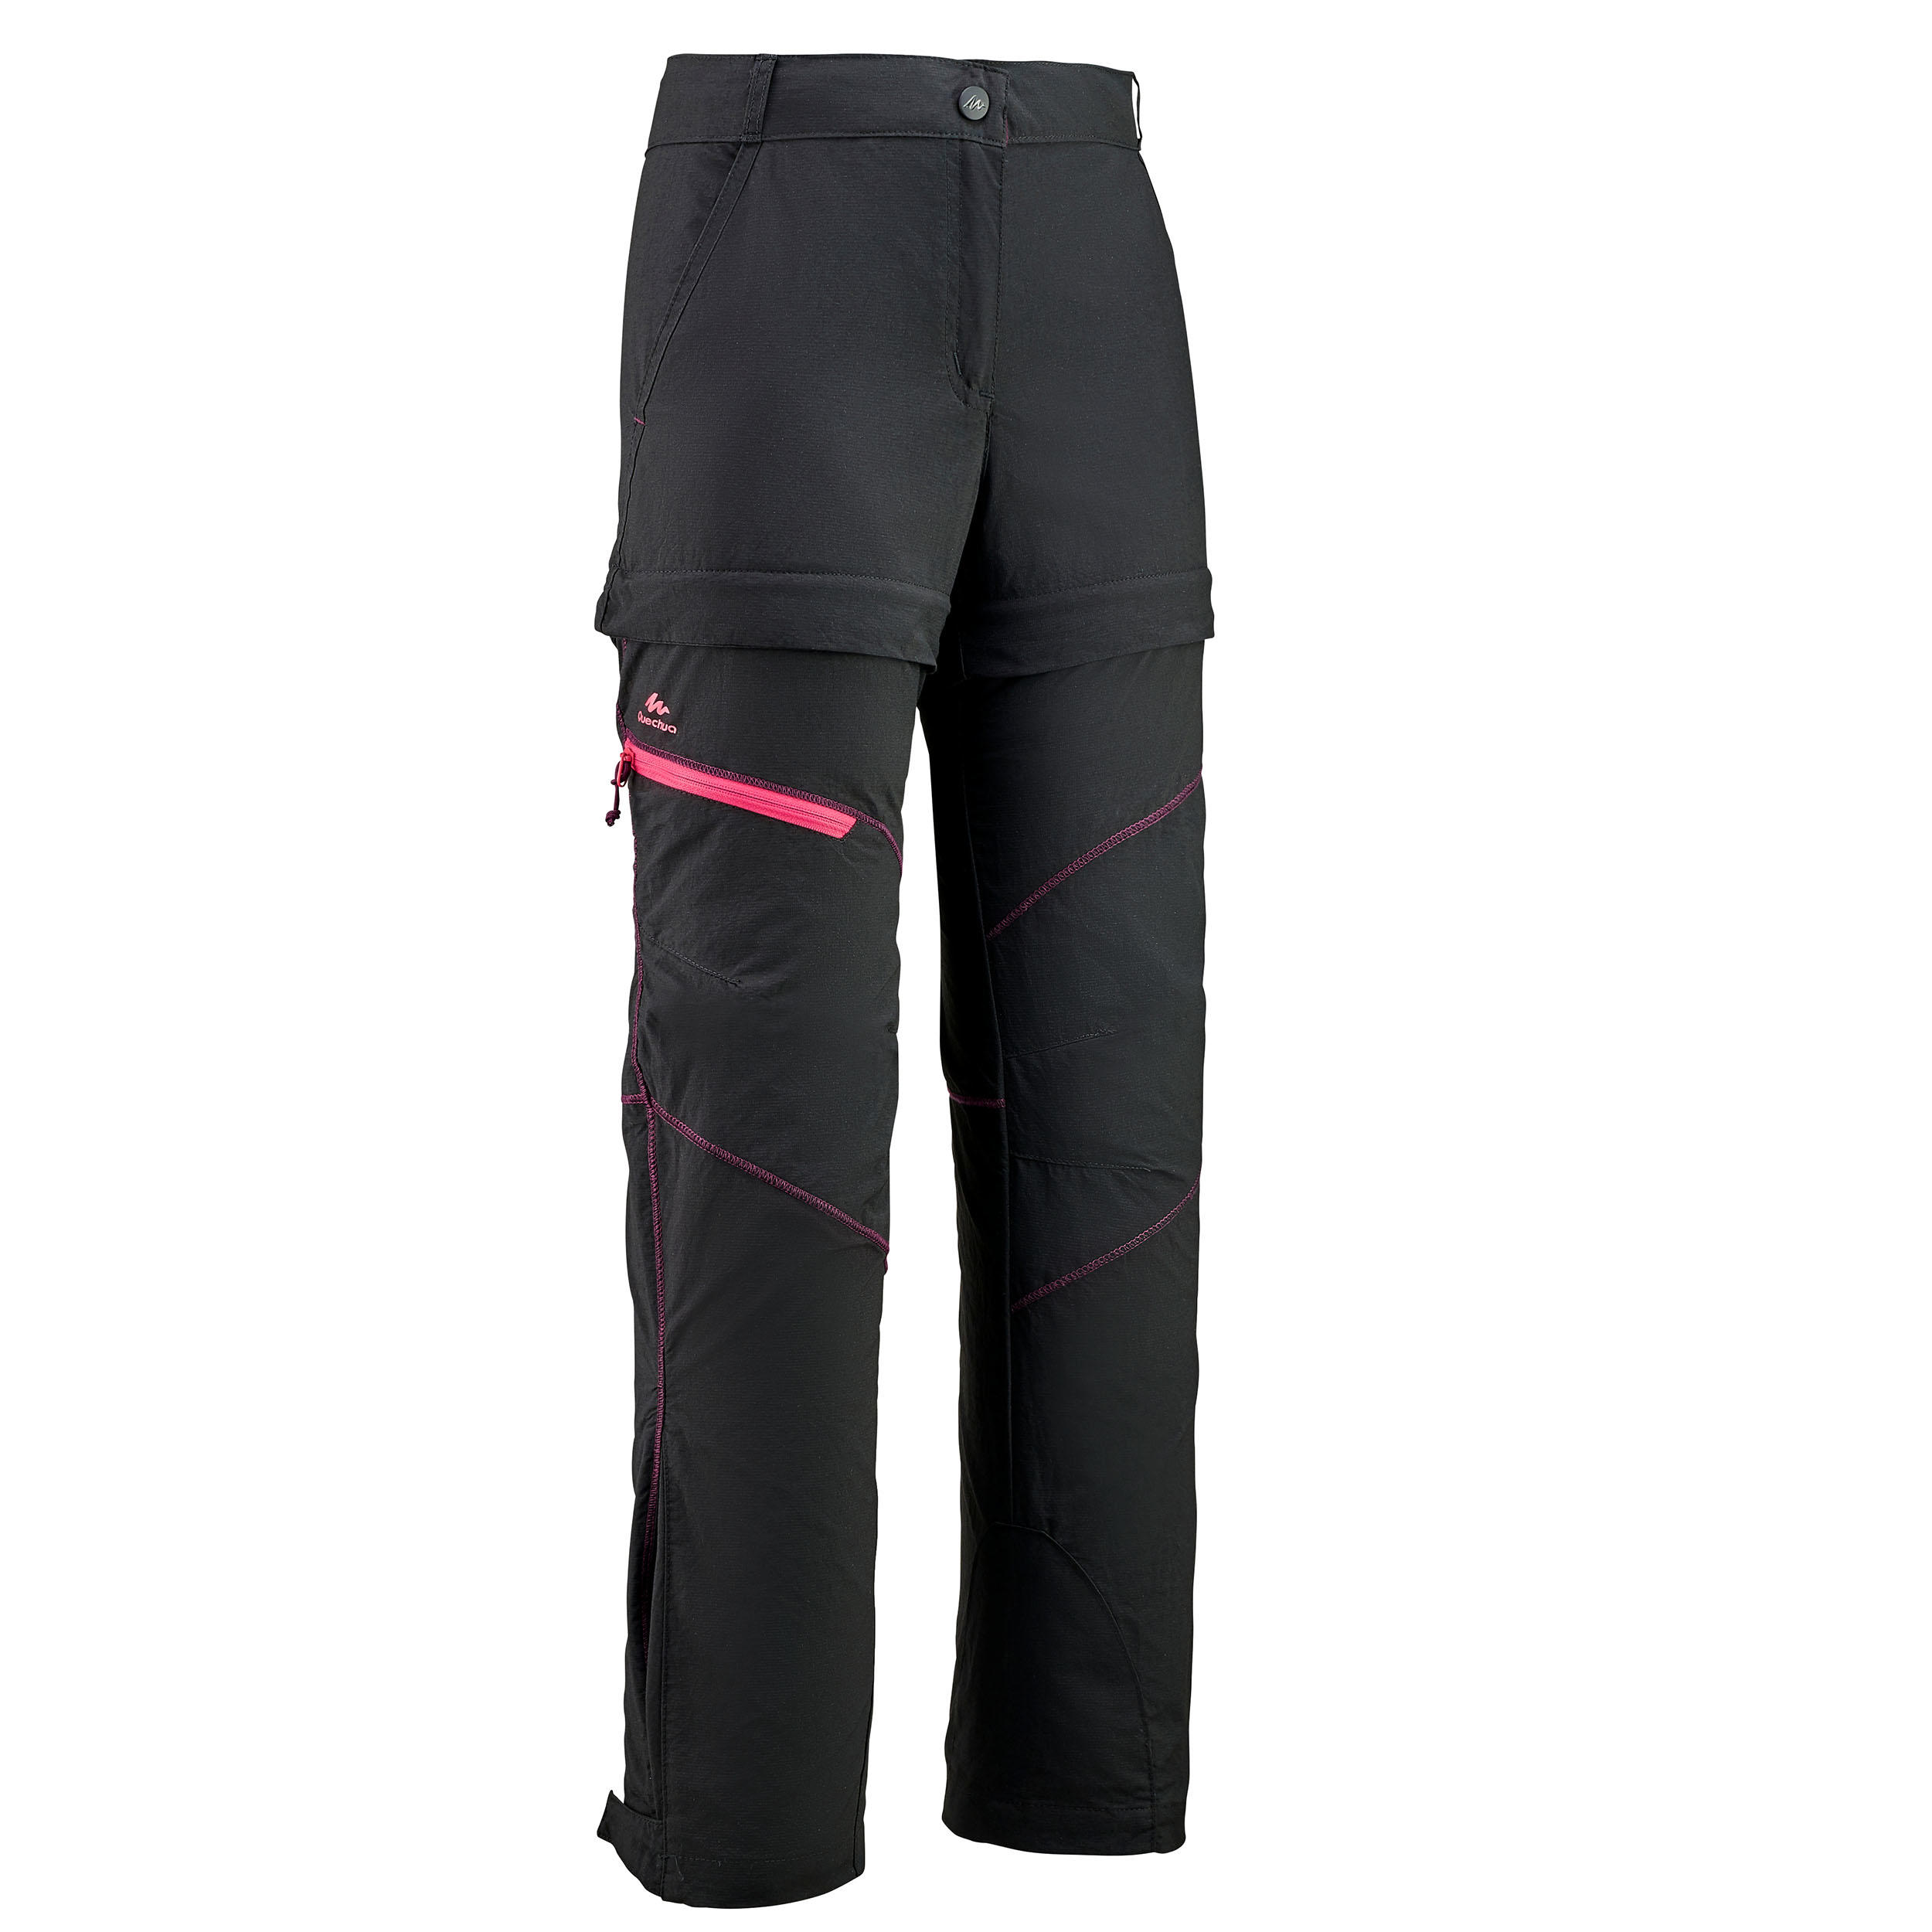 Decathlon Malaysia - #BackInTheGame with Men's convertible mountain hiking  trousers by Quechua. Its lightweight, 430g in size and easy to convert into  shorts without taking off your shoes is something you looking